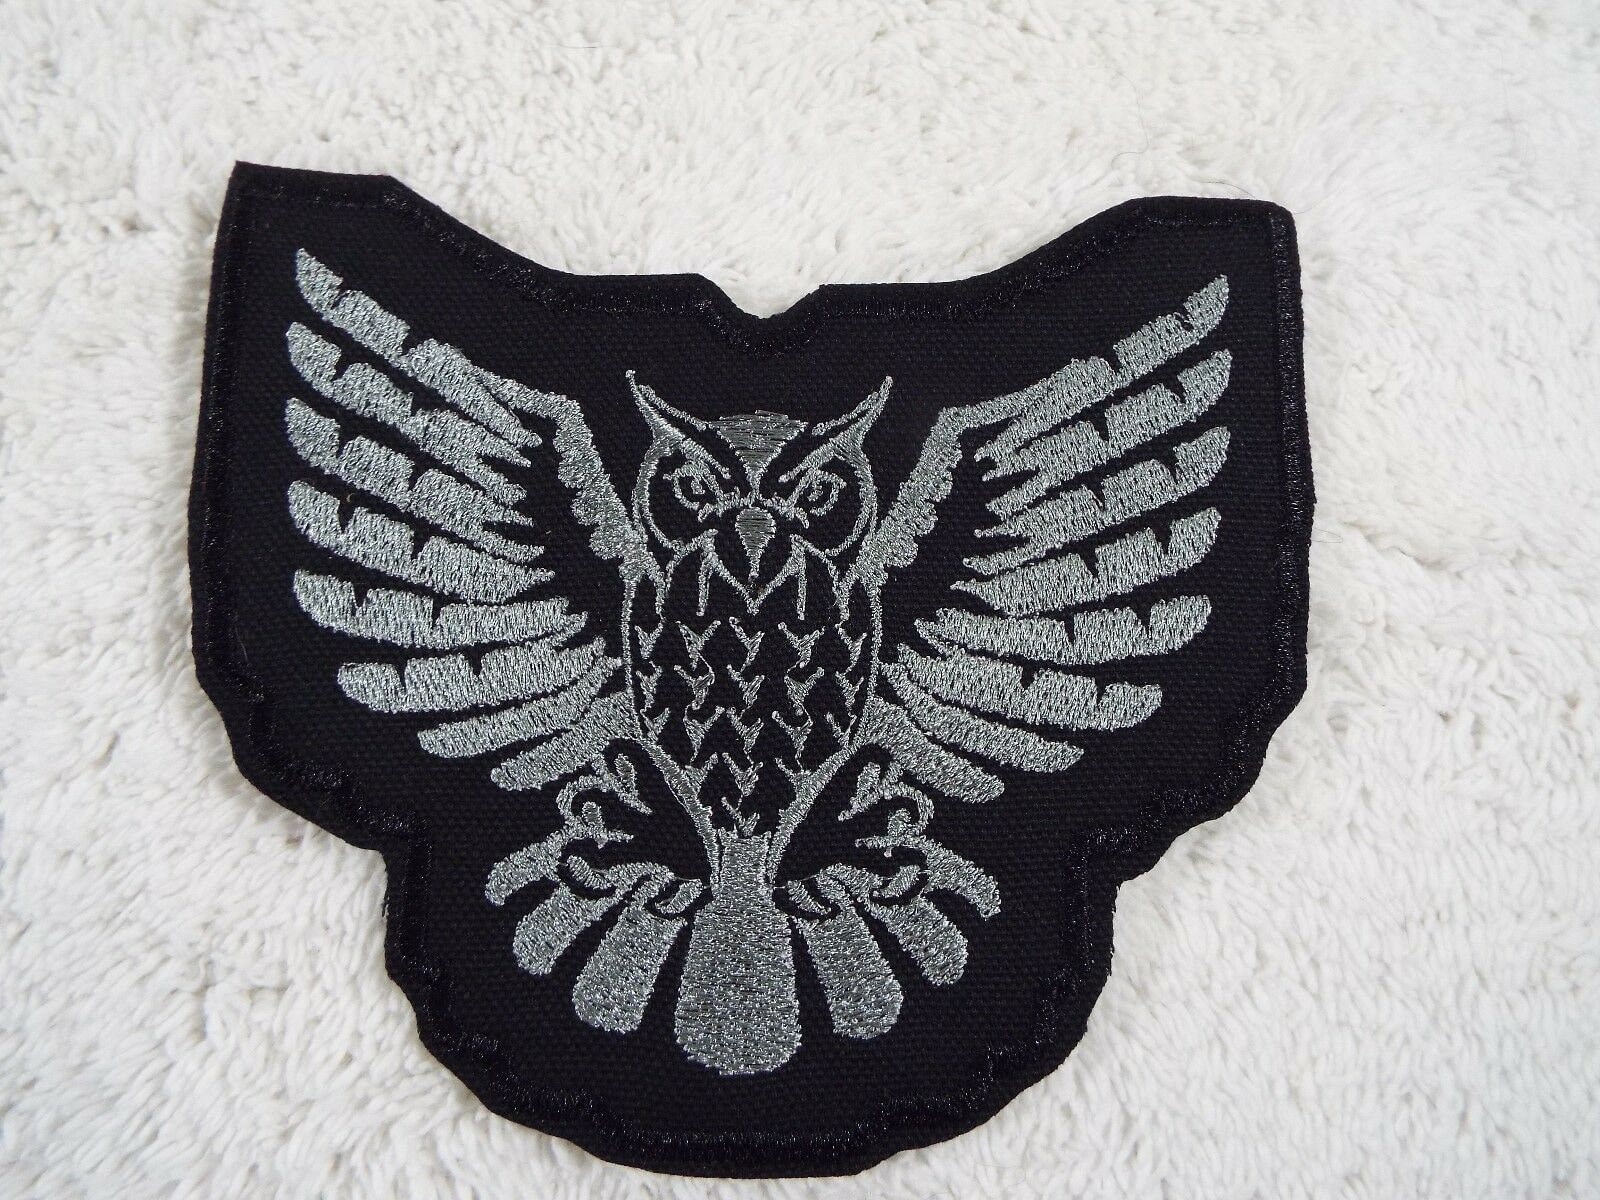 40 Pcs Embroidered Iron on patches Cute Owl Bird AP014OA